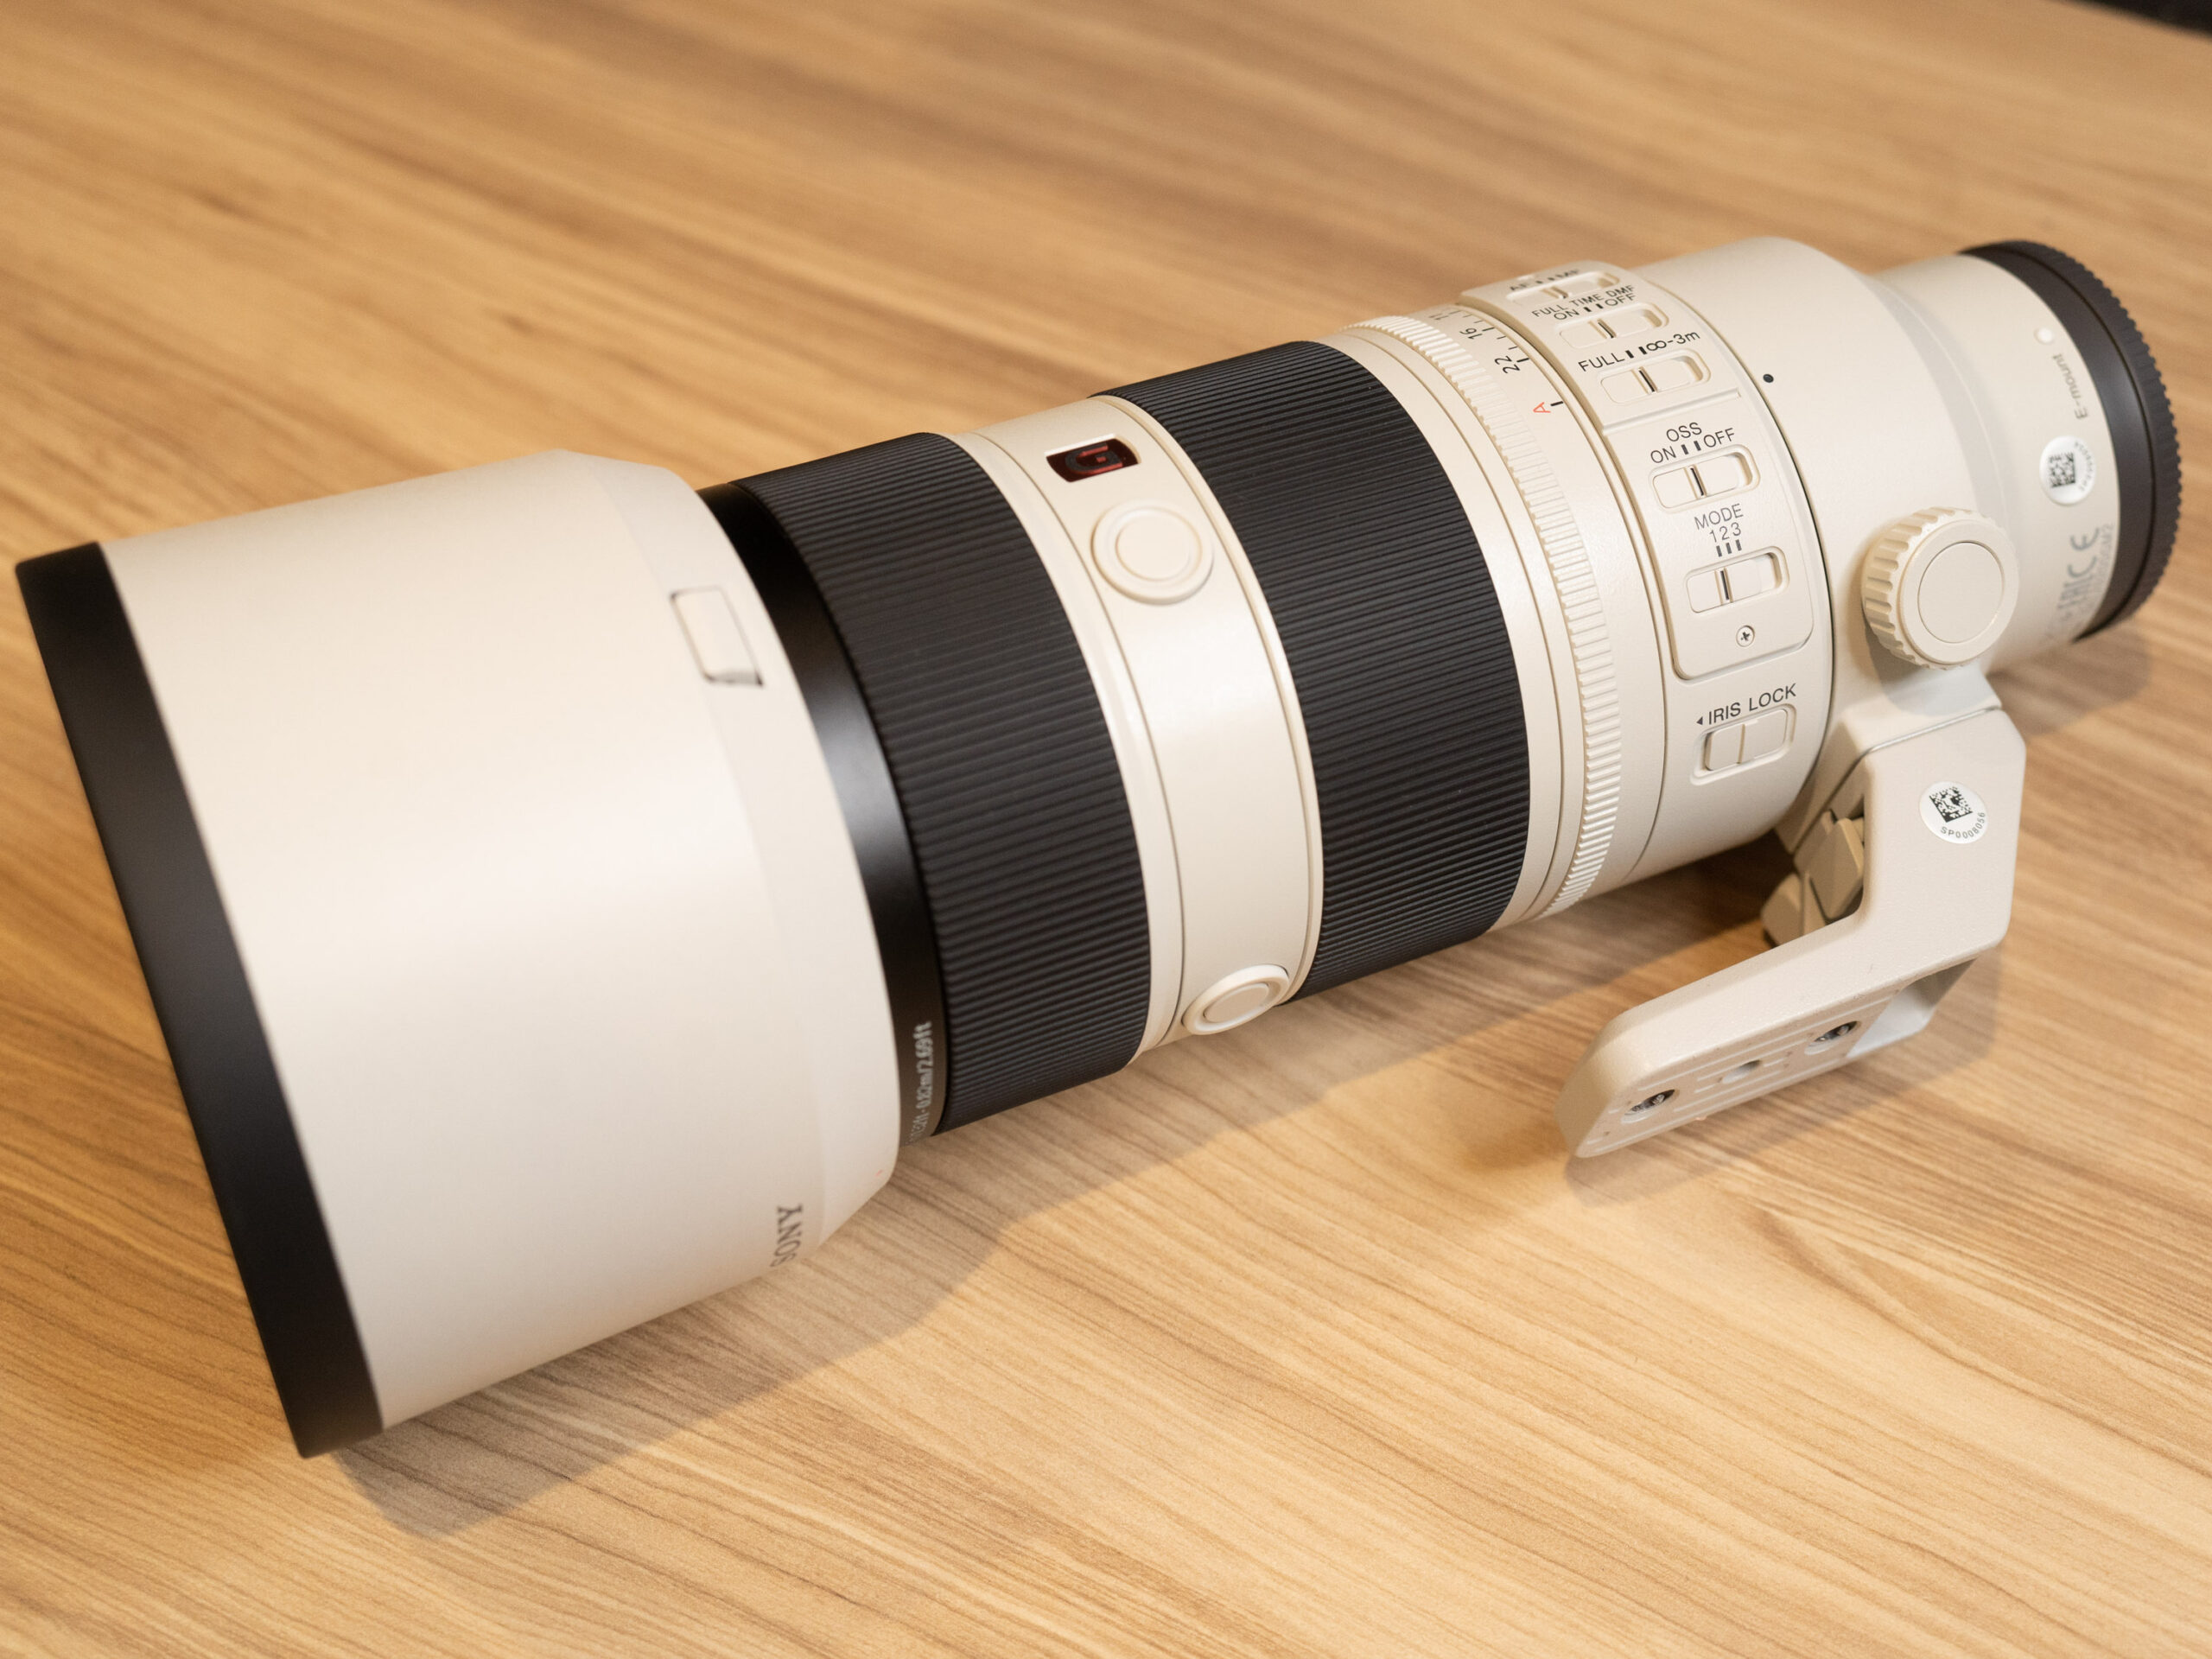 Sony FE 70-200mm F2.8 GM OSS Lens Review and Specs